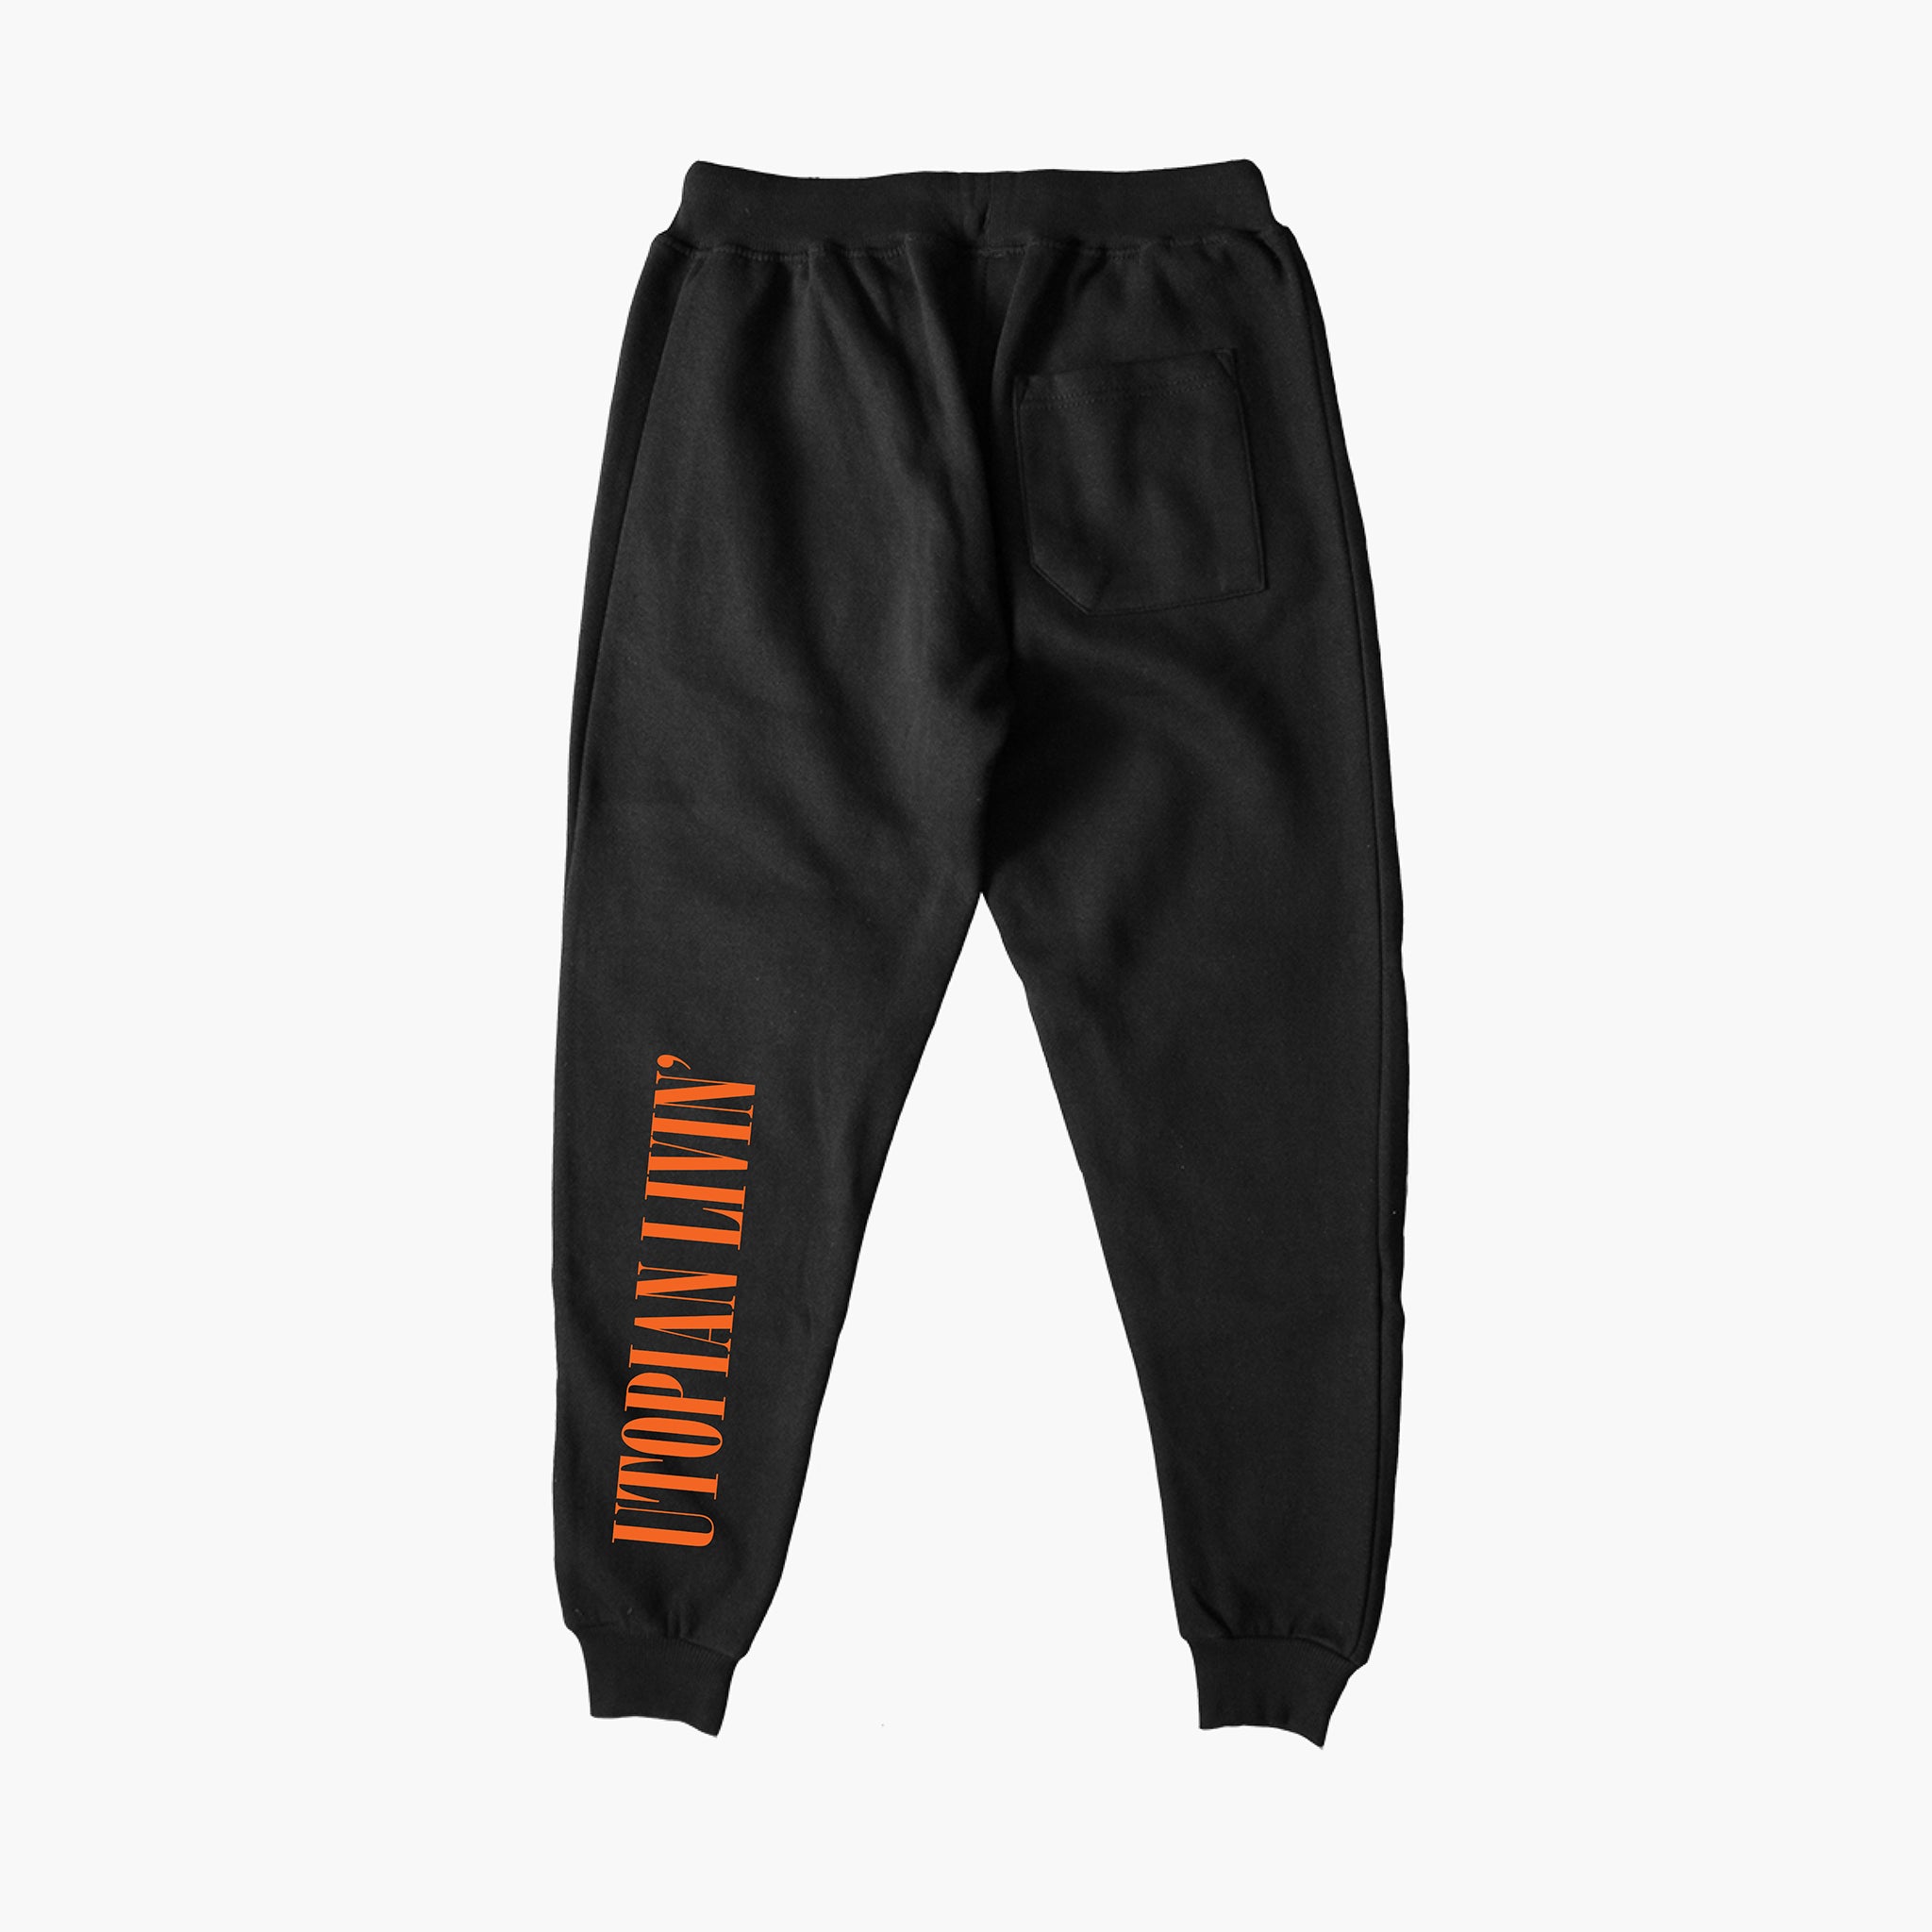 Utopian Livin Joggers - Frequently Asked Questions